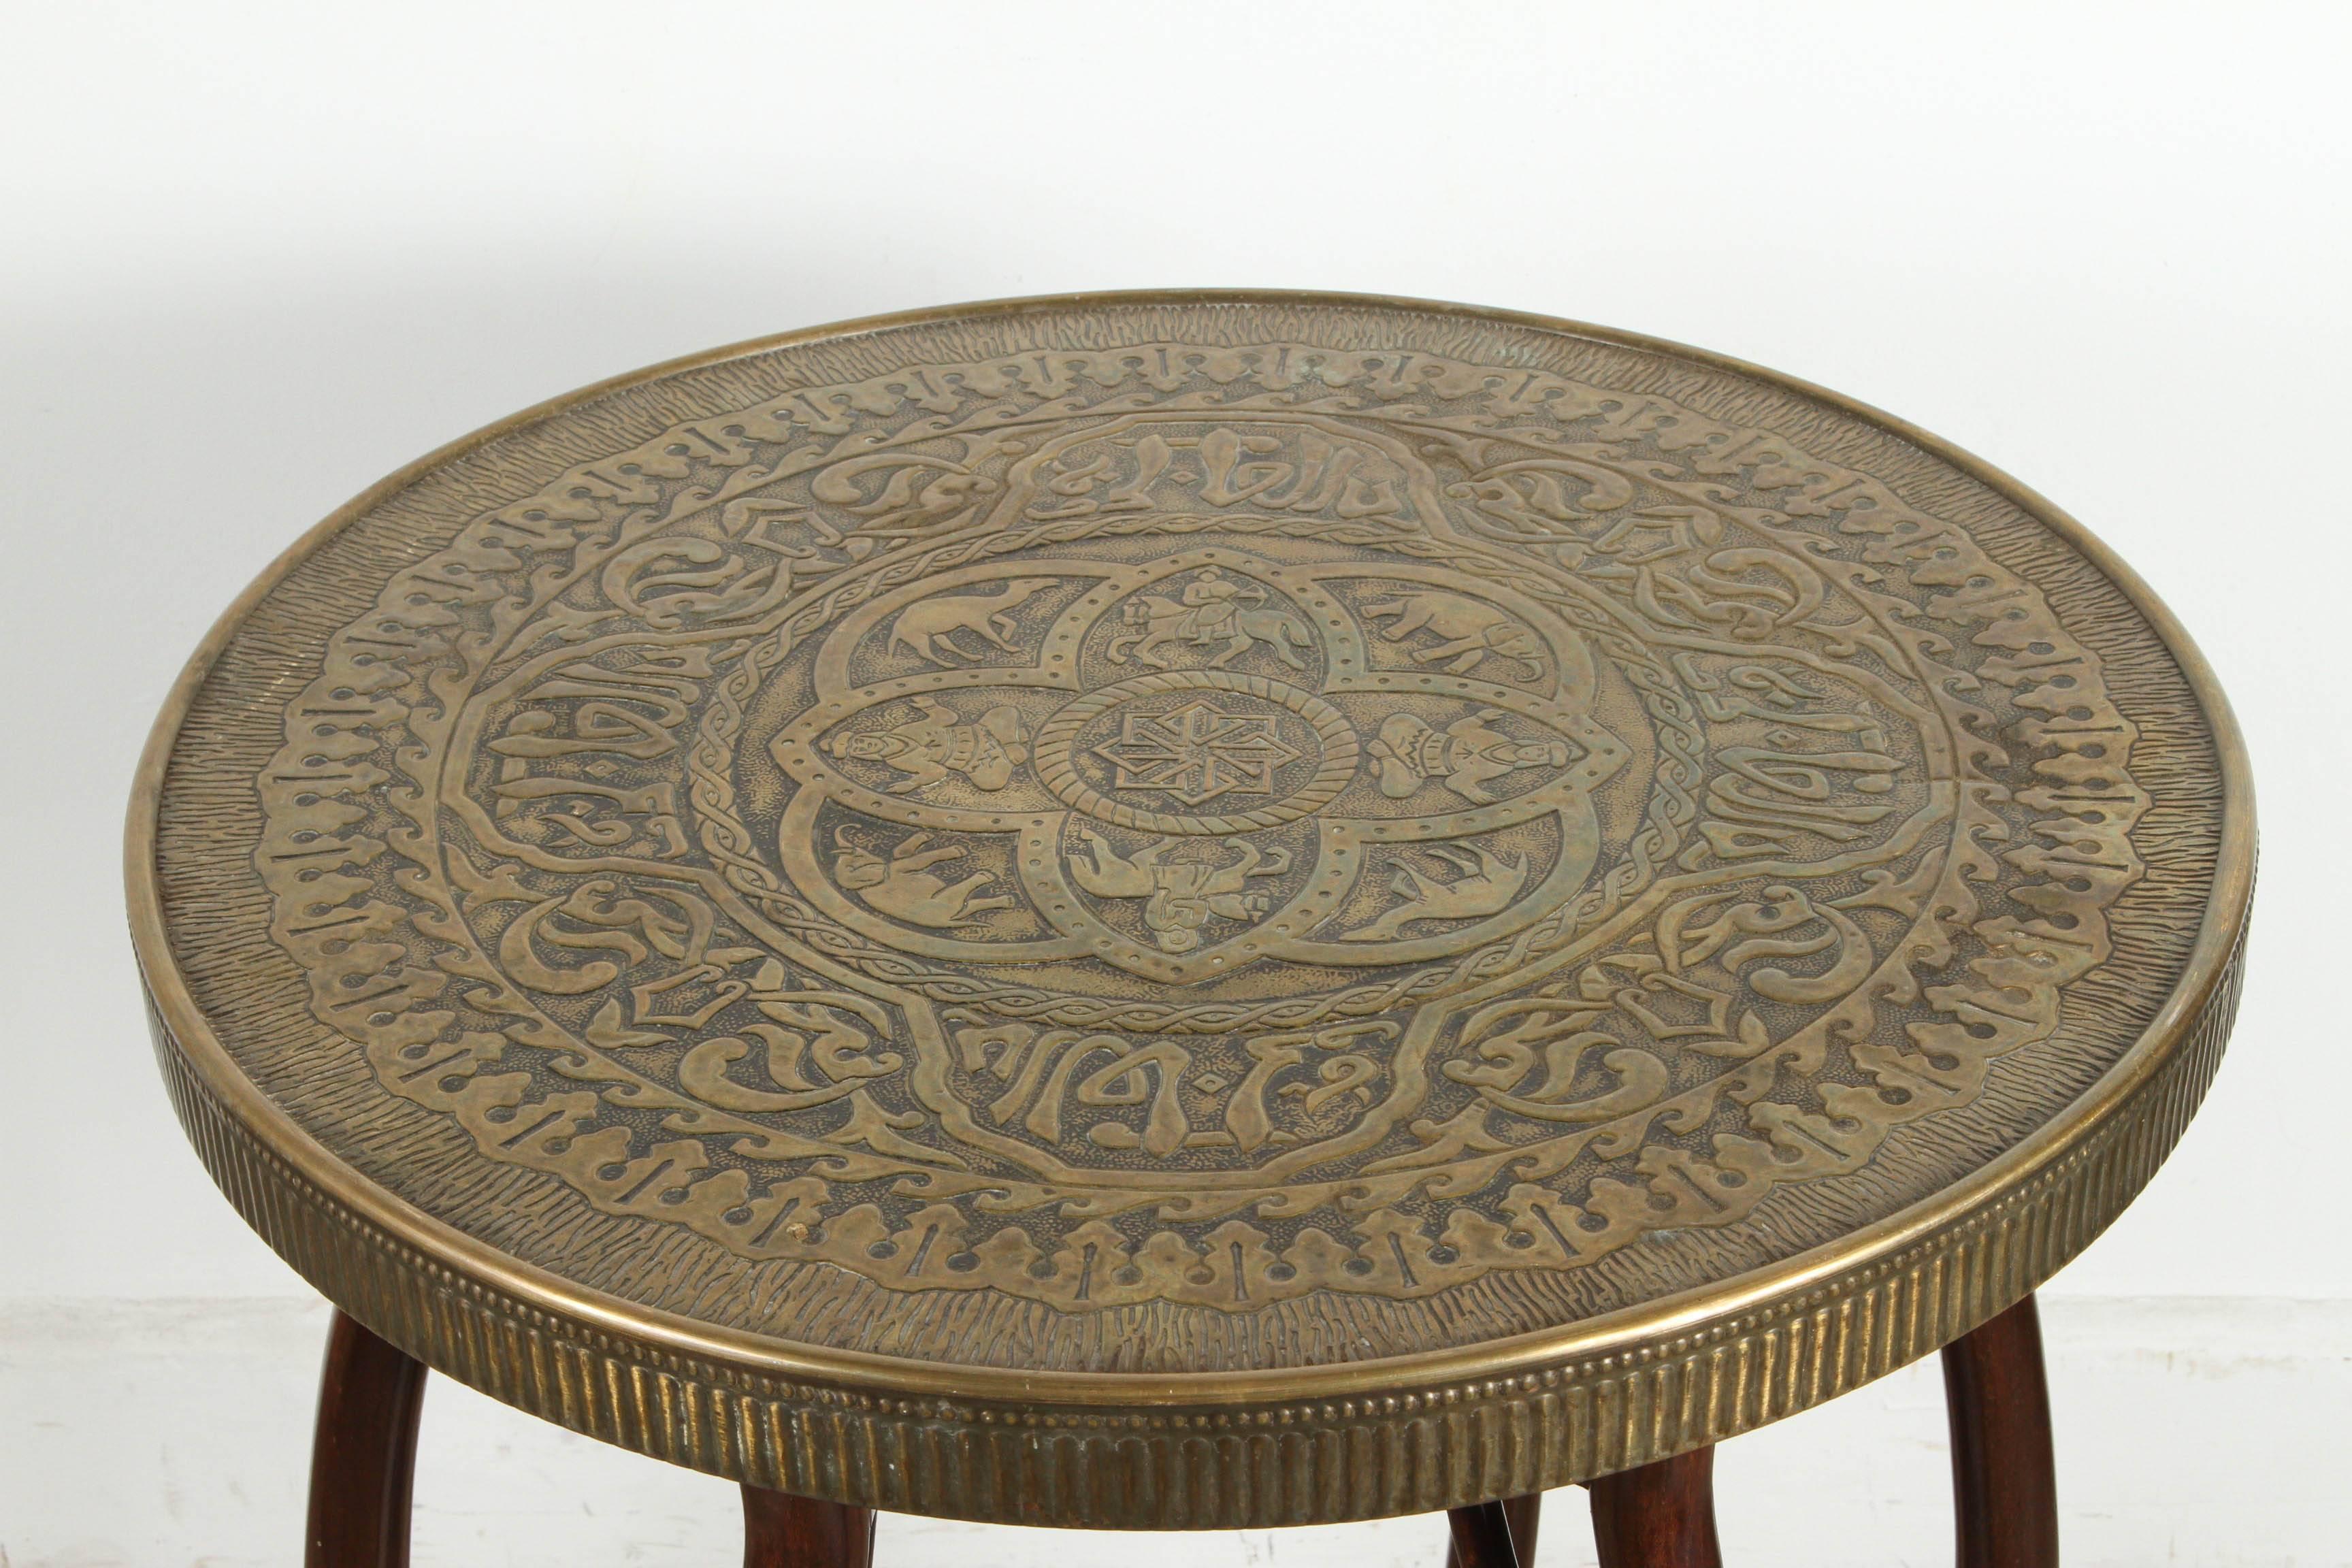 Middle Eastern brass tray table with bamboo stand, the top brass embossed top is decorated with calligraphy Arabic writing and figures of humans and animals in the middle medallion.
The top is removable and consist of a round wooden top covered